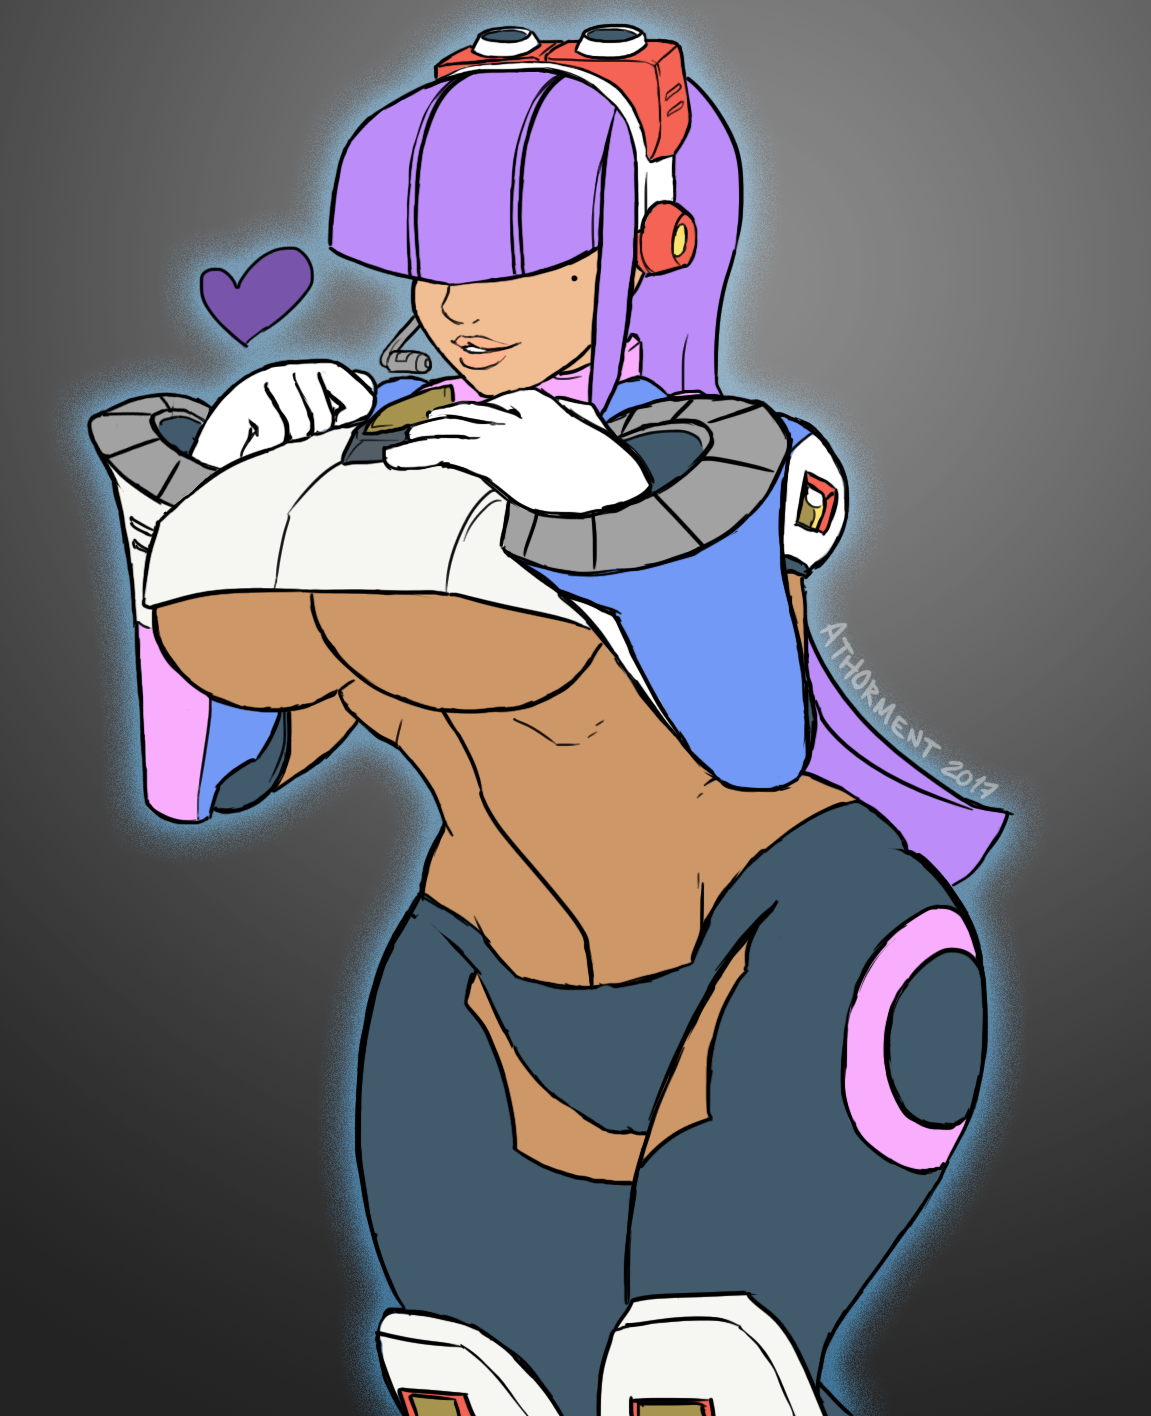 project-sexy-art: Layer from Megaman X8 Was a little bit bored so opted to try a